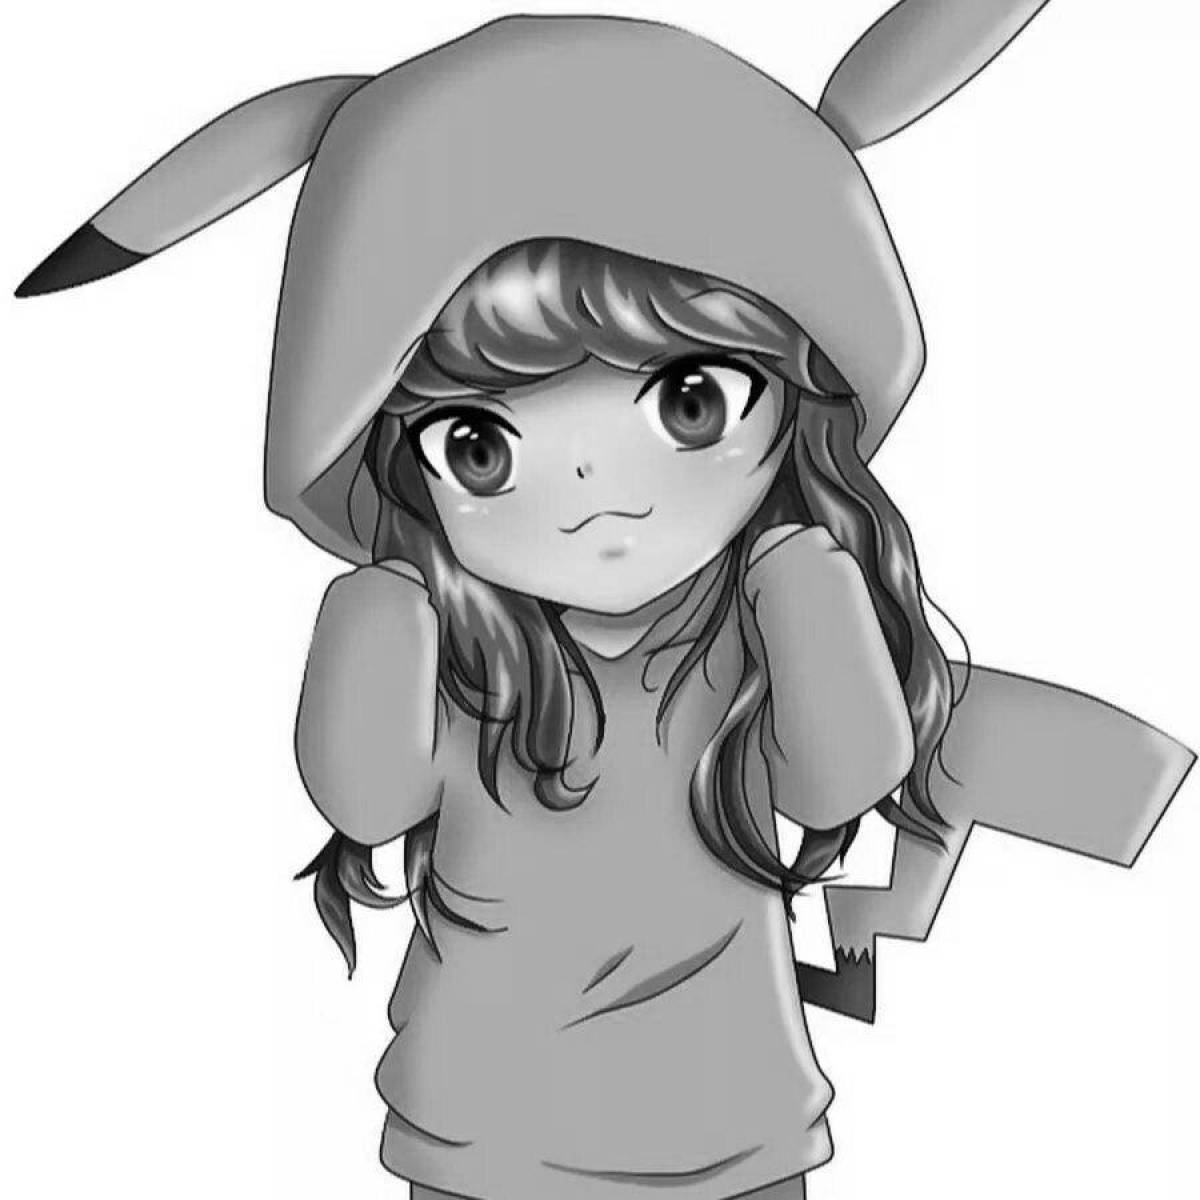 Violent coloring of a girl in a pikachu costume